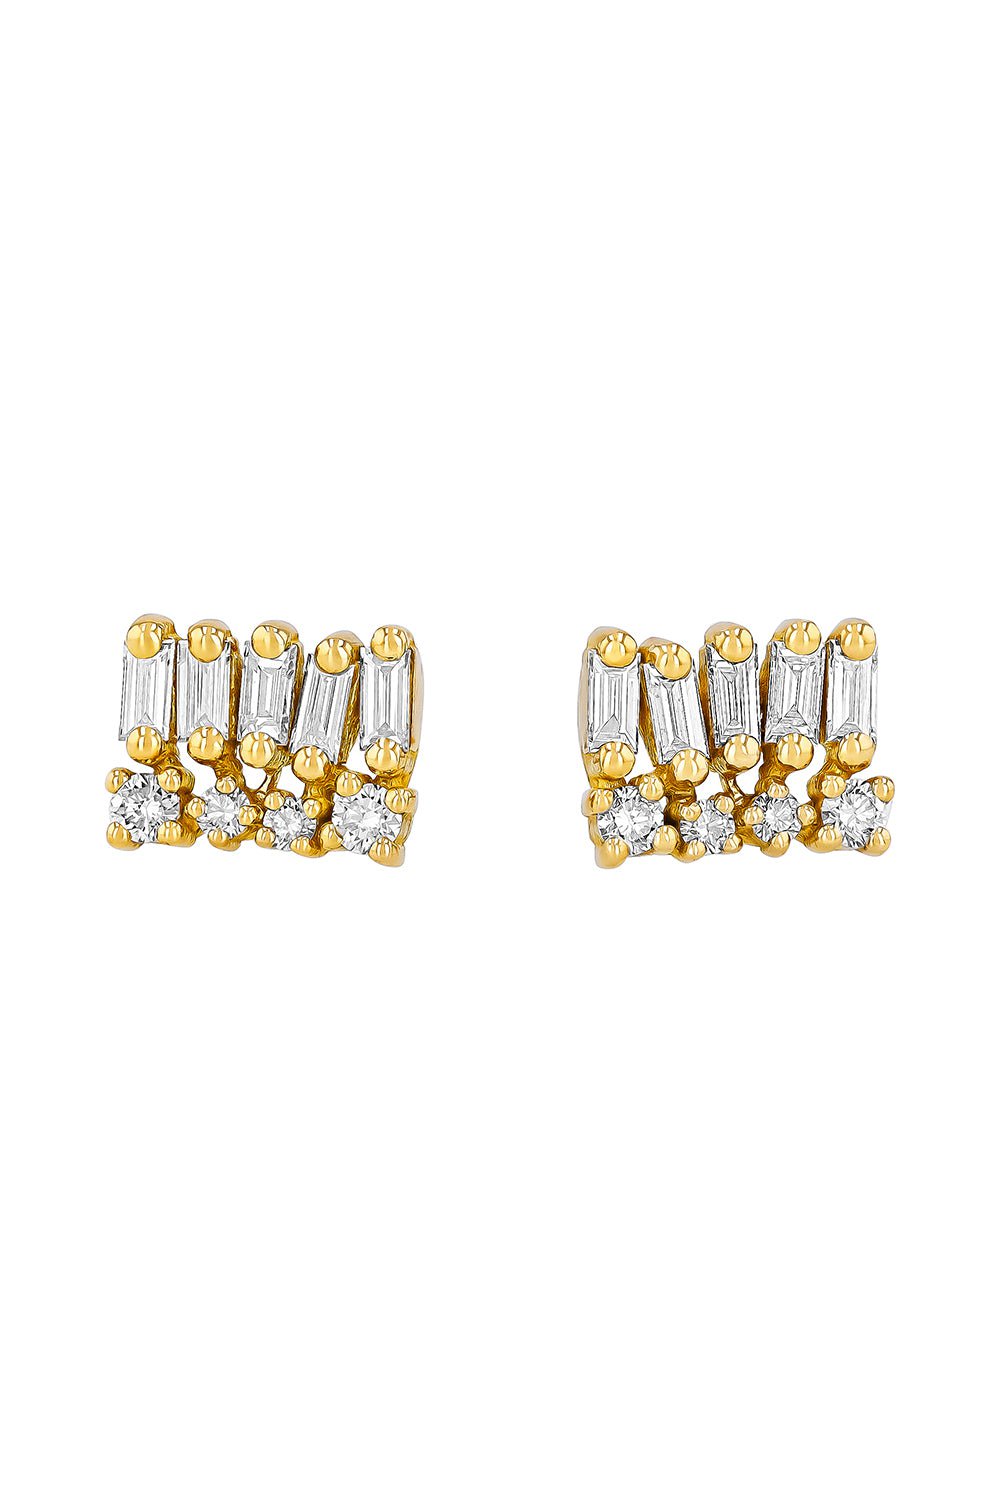 Short Stacked Mixed Stud Earrings JEWELRYFINE JEWELEARRING SUZANNE KALAN YELLOW GOLD  